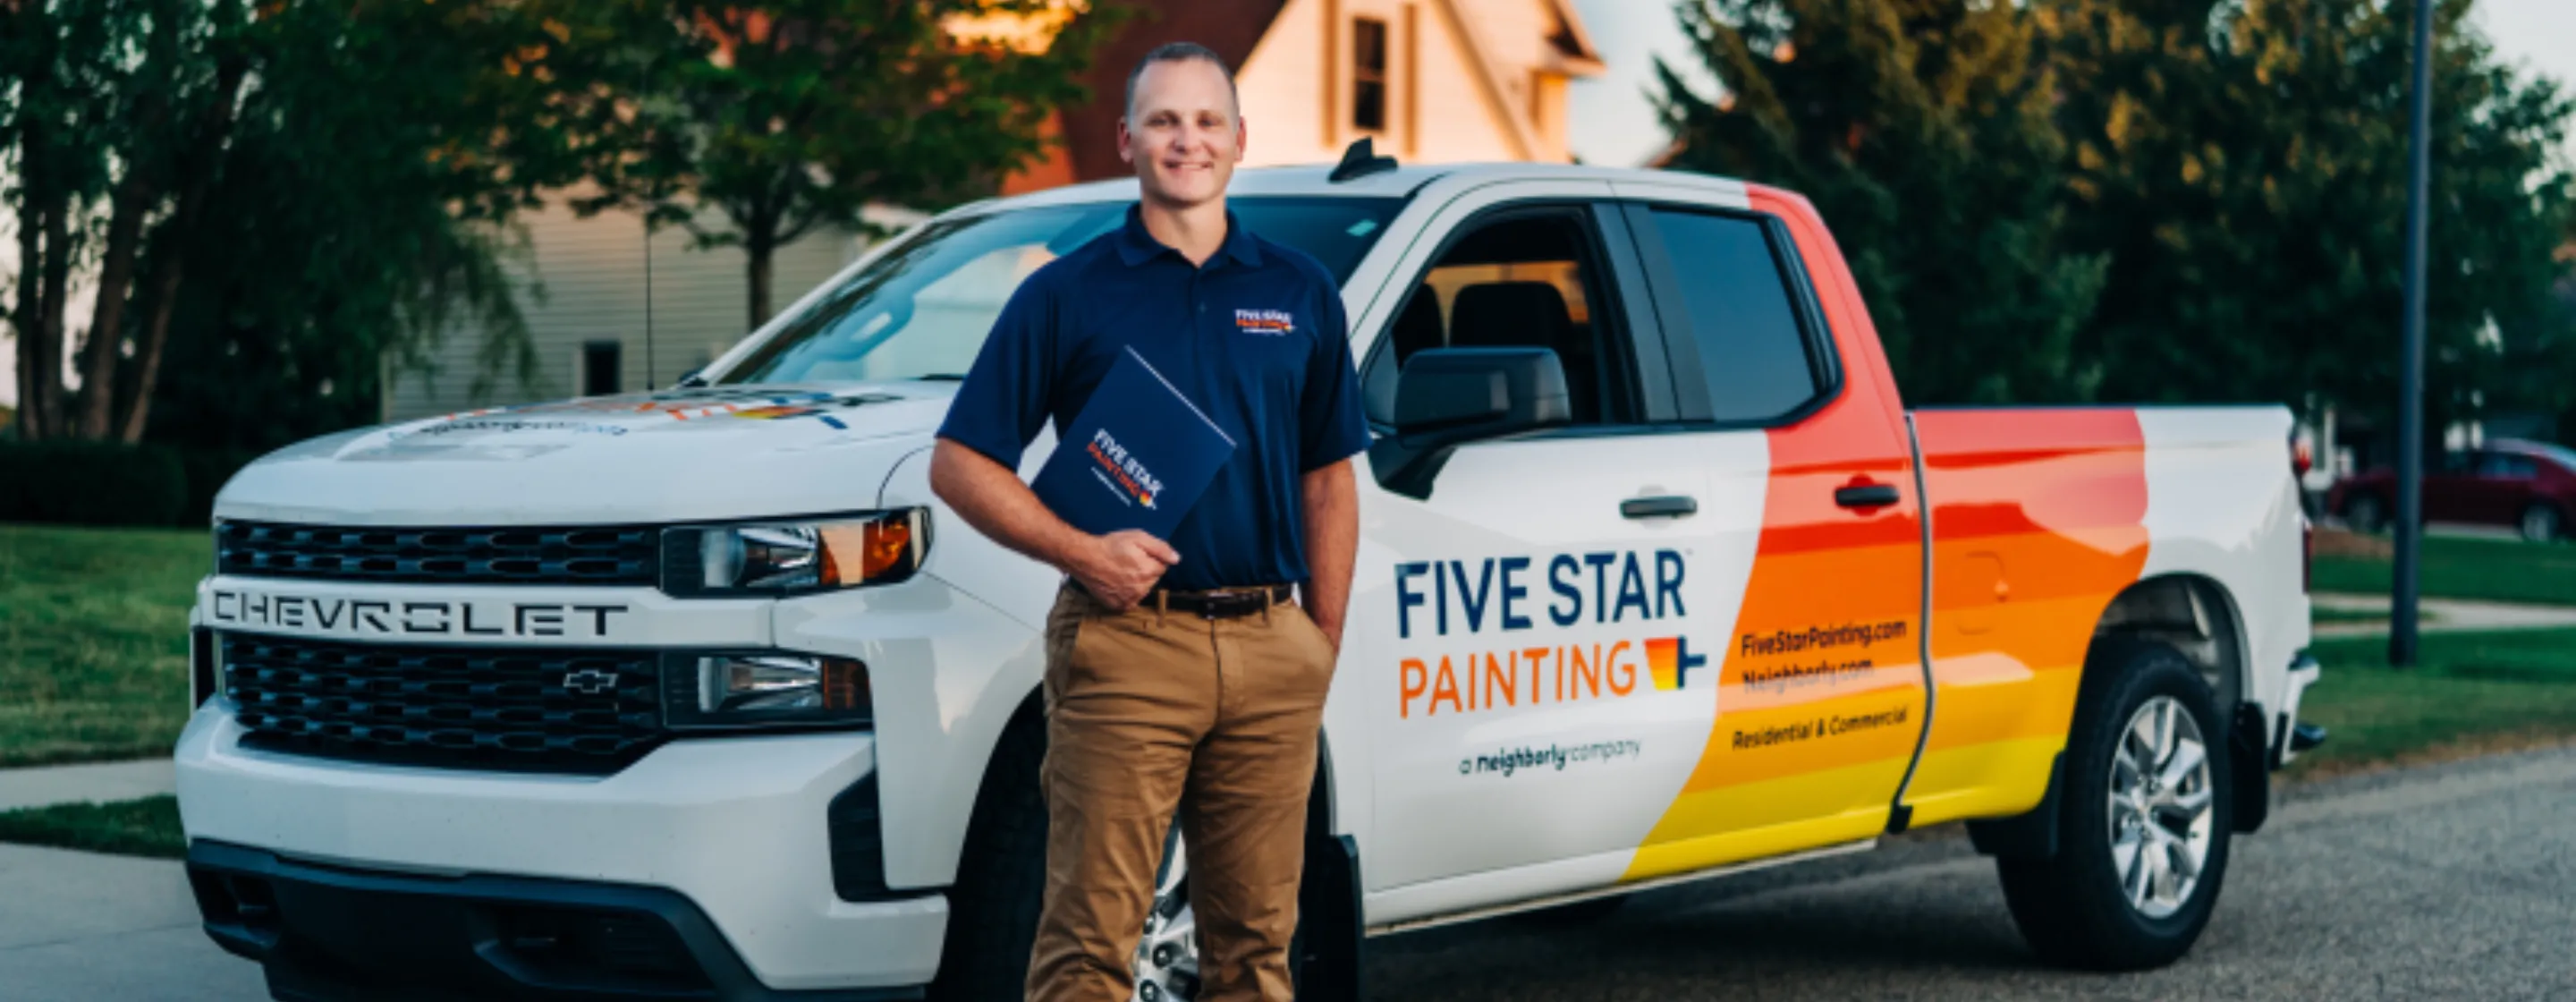 Five Star Painting branded truck and technician